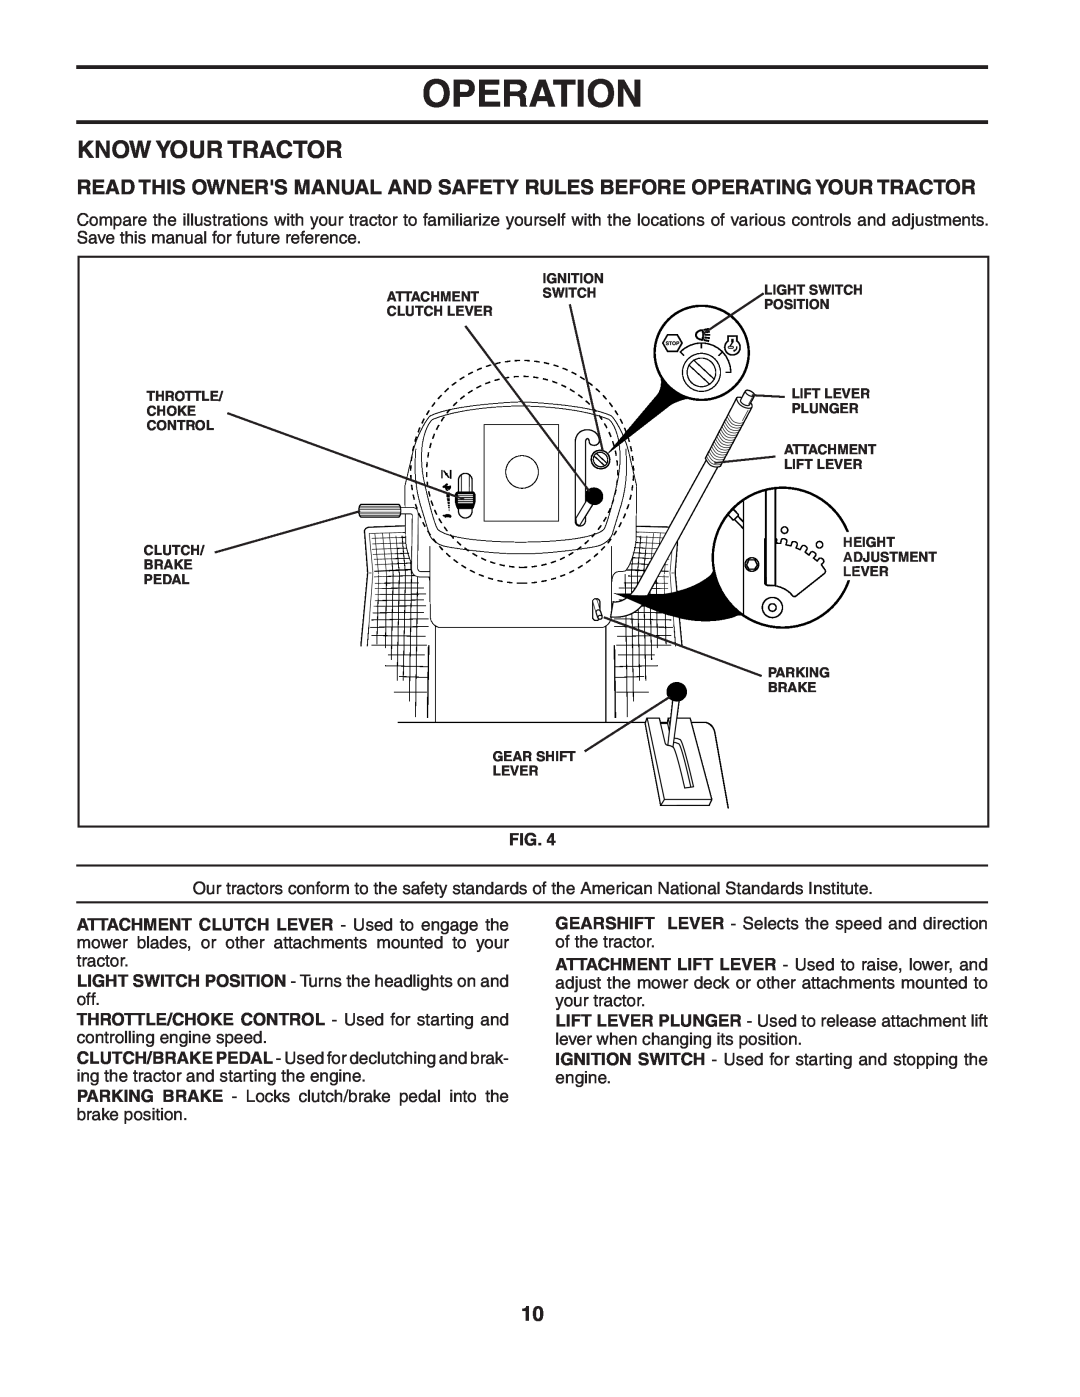 Poulan PO1742STB manual Know Your Tractor, Operation 